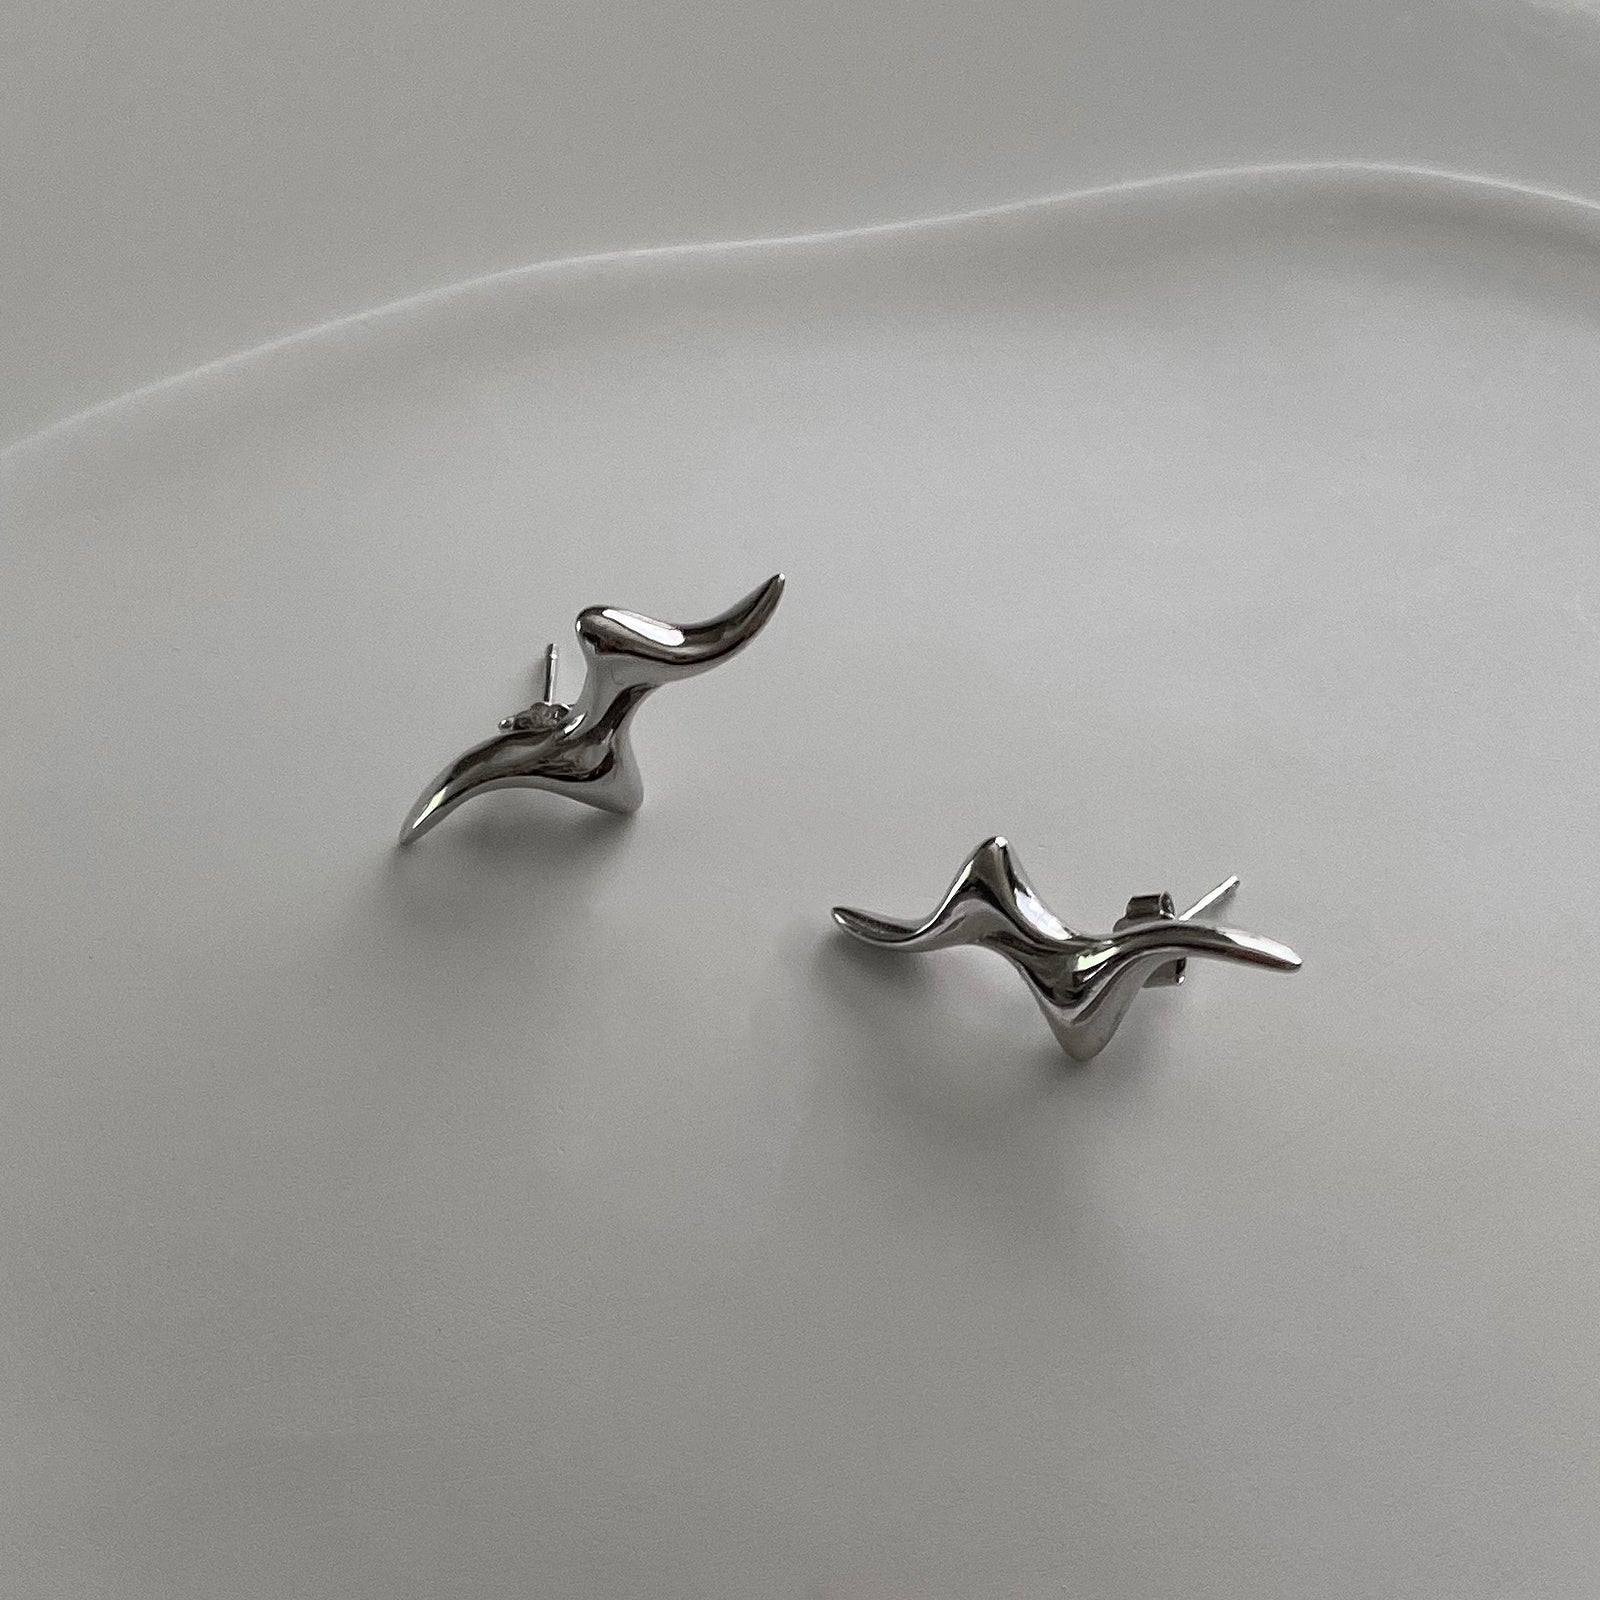 A close up of our Swirly Bolt Studs. These earrings have a cool wavy-like design.